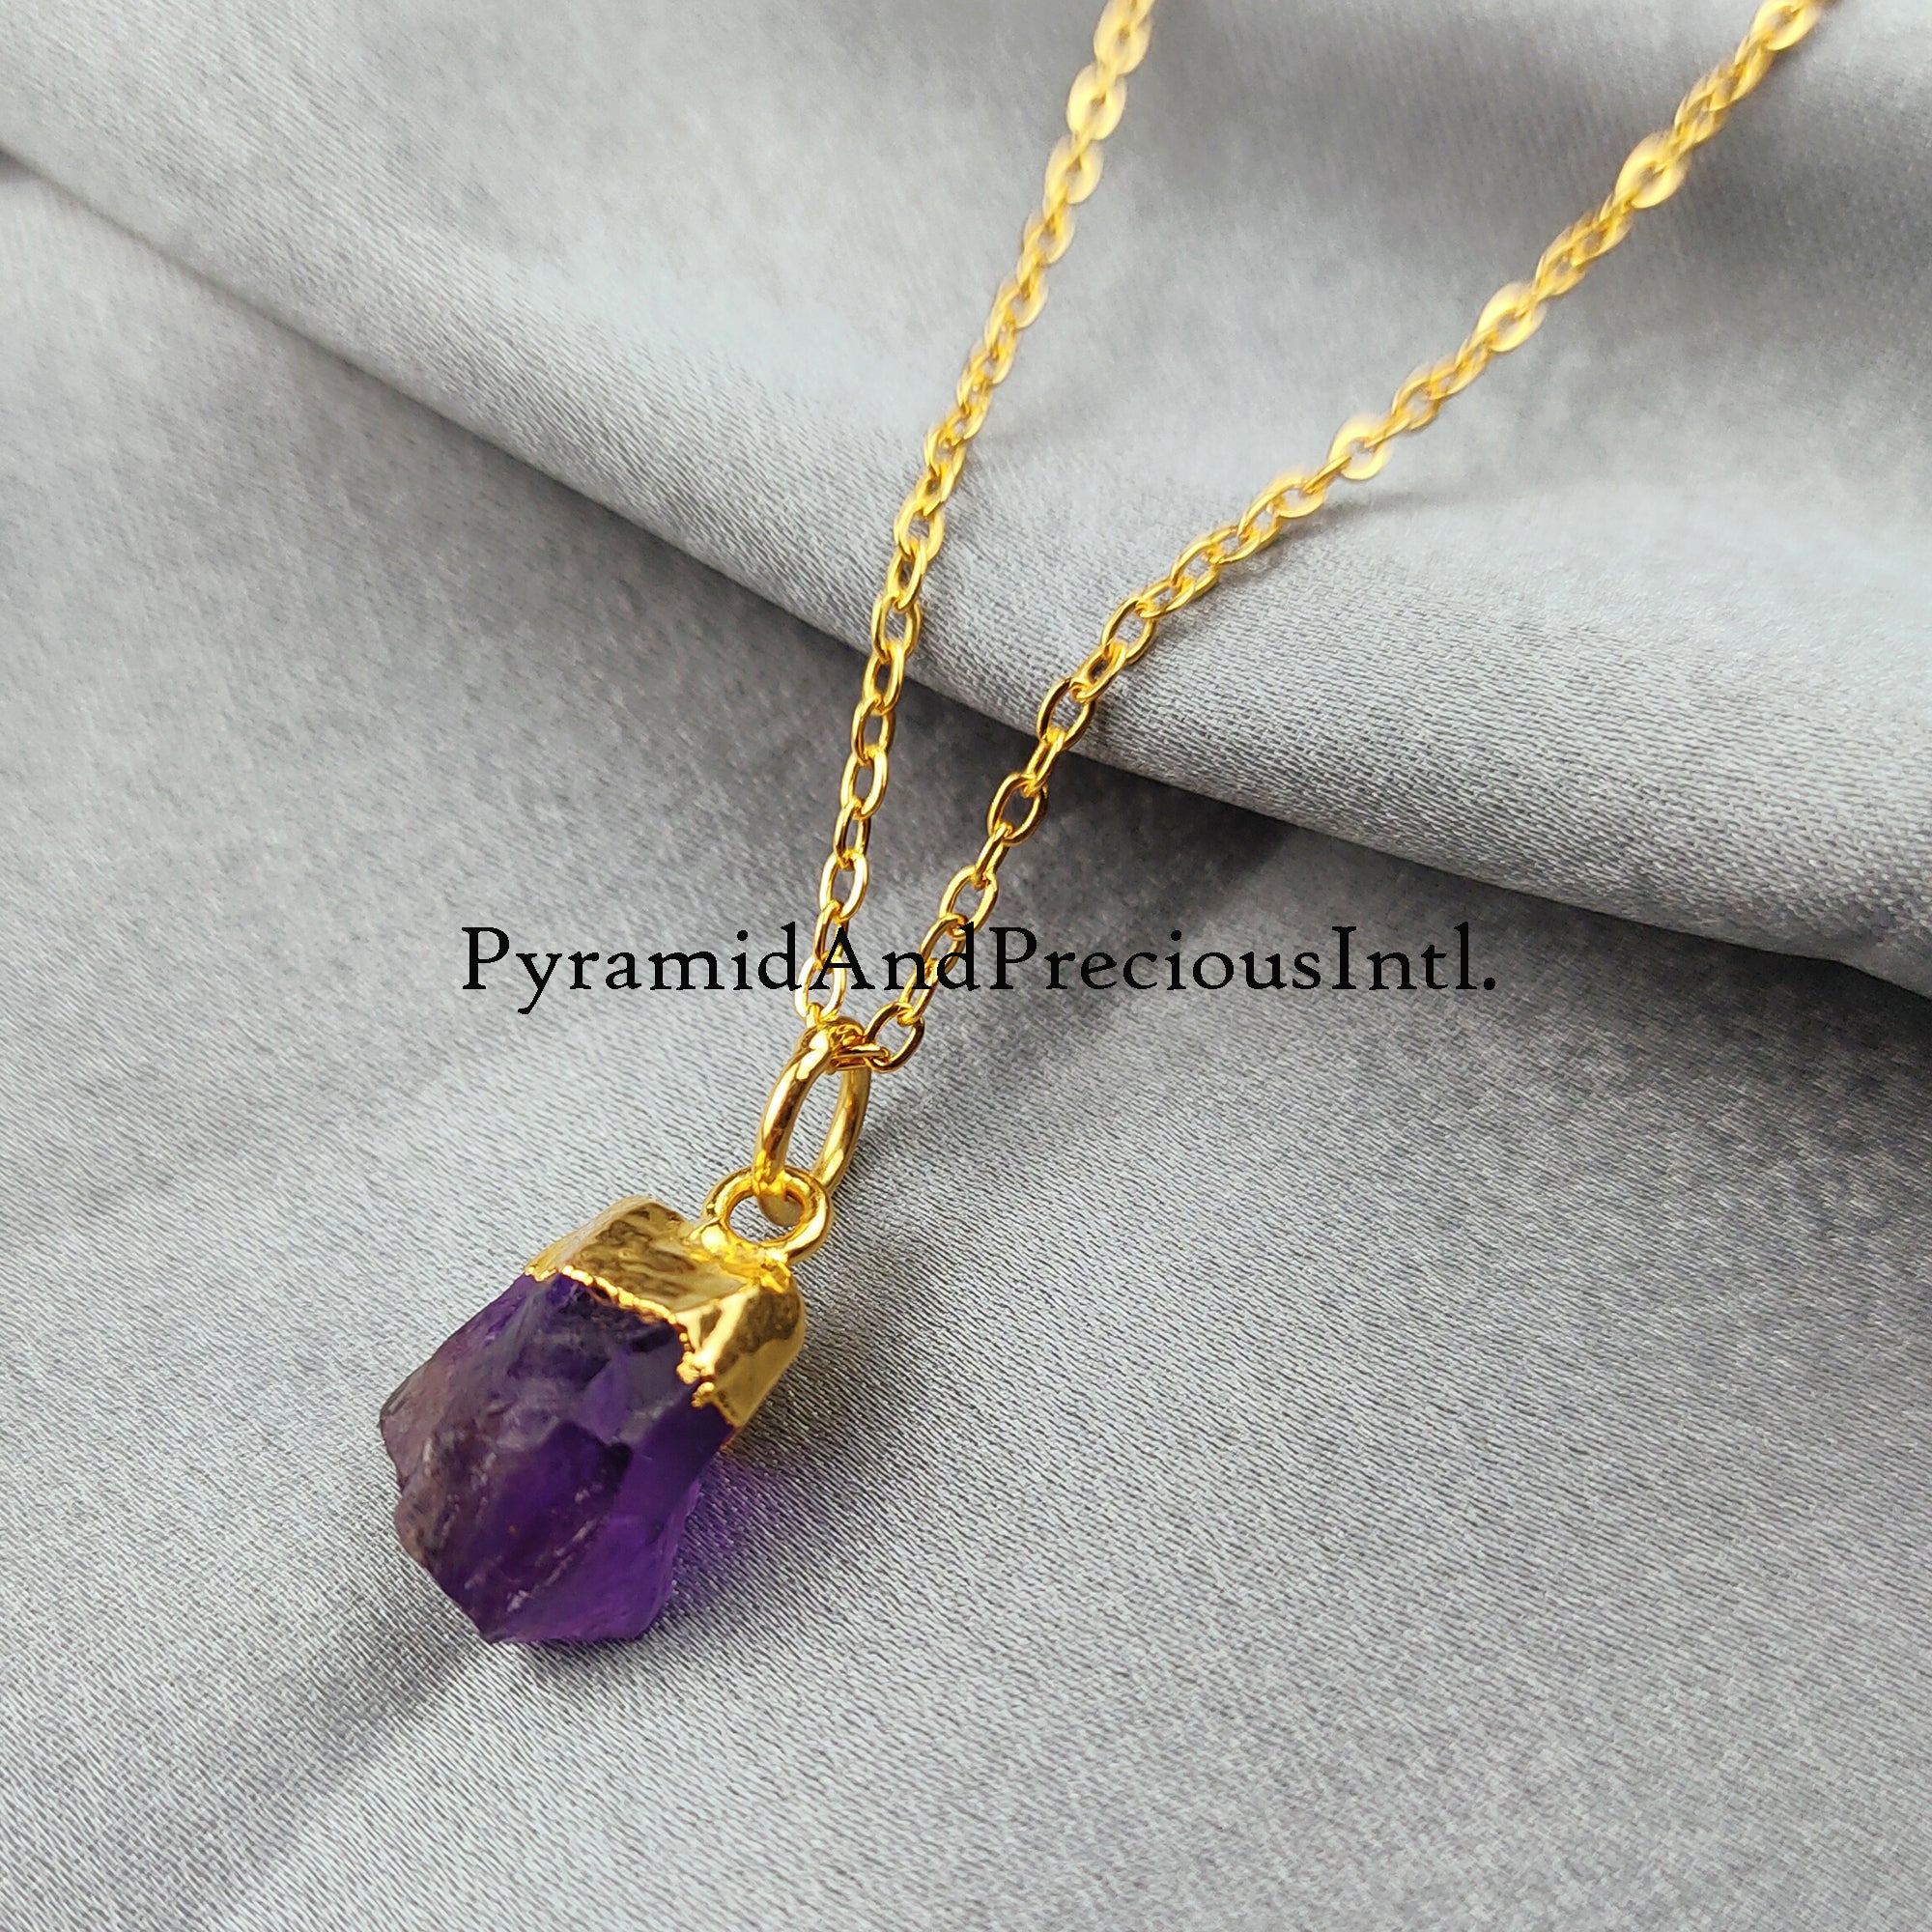 Raw Amethyst necklace, Gold Plated Necklace, Amethyst crystal necklace, rough Amethyst necklace